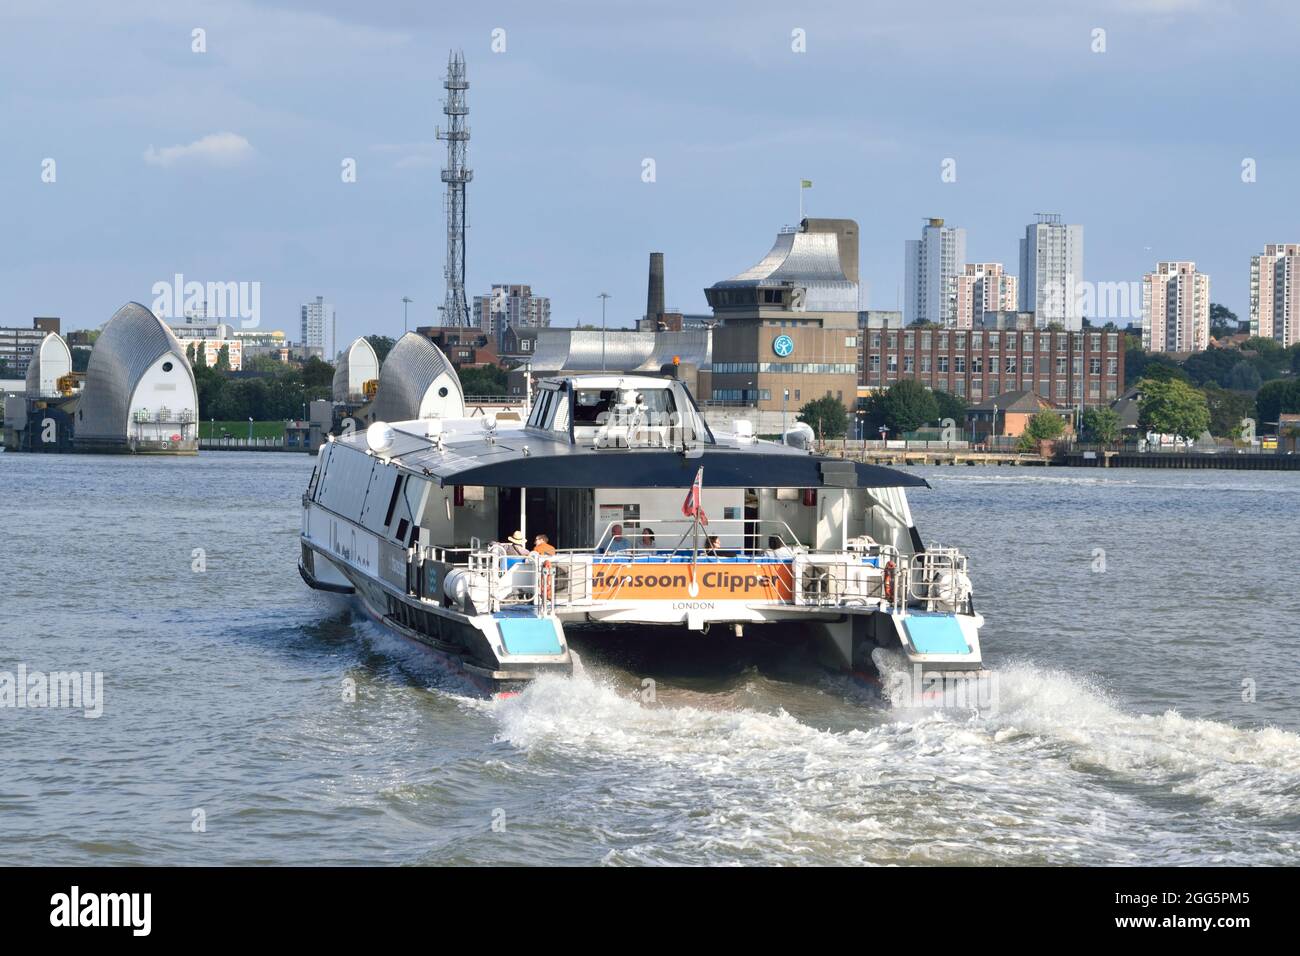 Uber Boat by Thames Clipper River Bus Service Vessel Monsoon Clipper betreibt den RB1 River Bus Service auf der Themse in London Stockfoto